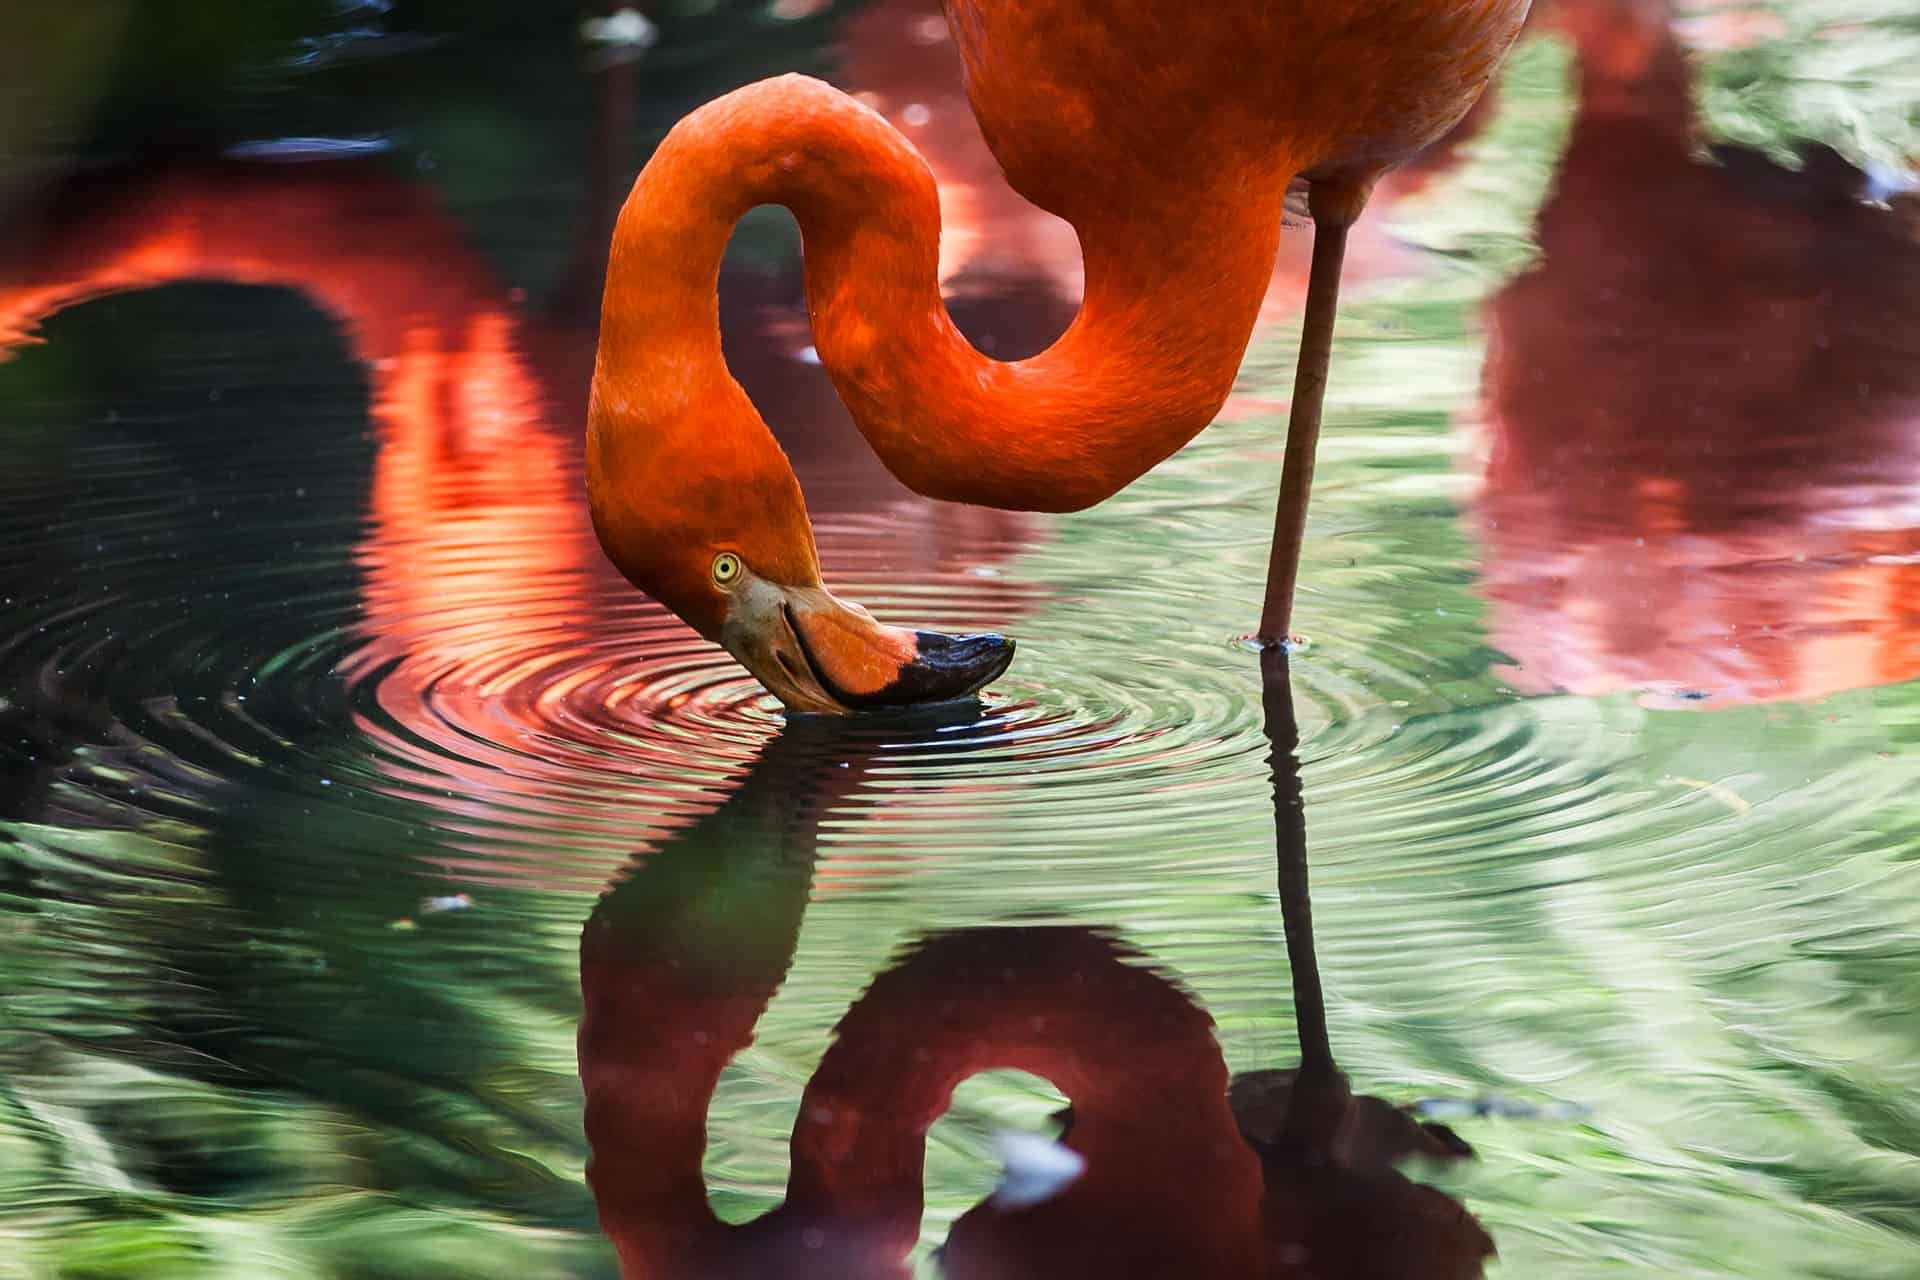 Flamingo Adaptations For Survival? How Does A Flamingo Adapt To Its Environment?